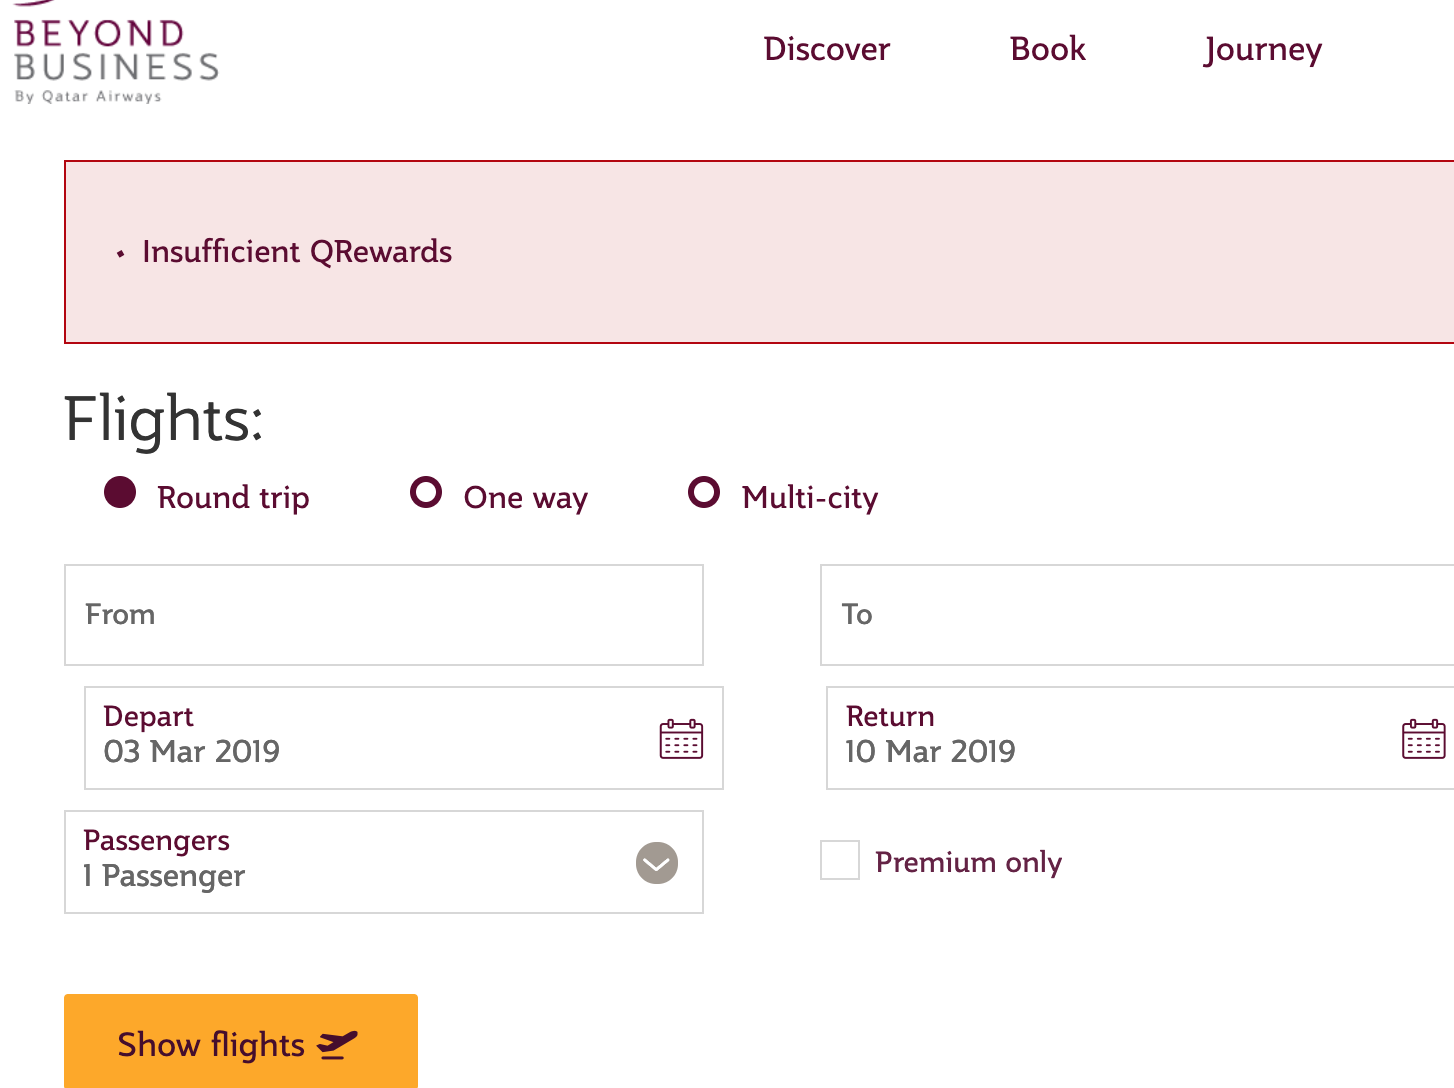 You can also redeem Qrewards on cabin upgrades and more.